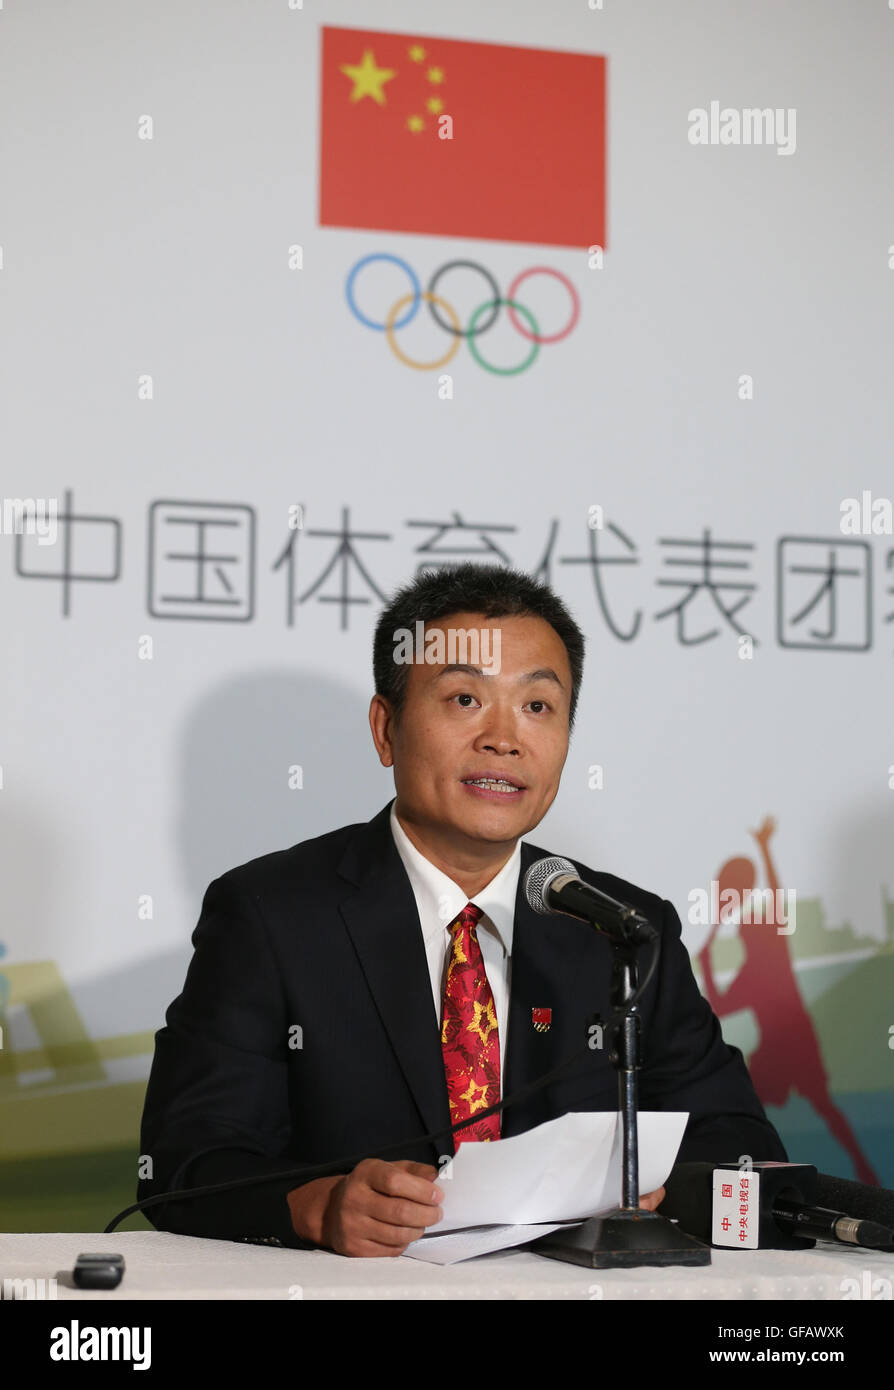 Sau Paulo, Brazil. 30th July, 2016. Deputy Chef de Mission of the Pre-Games Training Camp of the Chinese delegation Sun Yuanfu speaks during a press conference at Esporte Clube Pinheiros in Sao Paulo, Brazil, July 30, 2016. Chinese athletes has arrived at Sao Paulo's Esporte Clube Pinheiros, the pre-games training center of the Chinese Olympic delegation for the upcoming Rio Olympic Games. © Xu Zijian/Xinhua/Alamy Live News Stock Photo